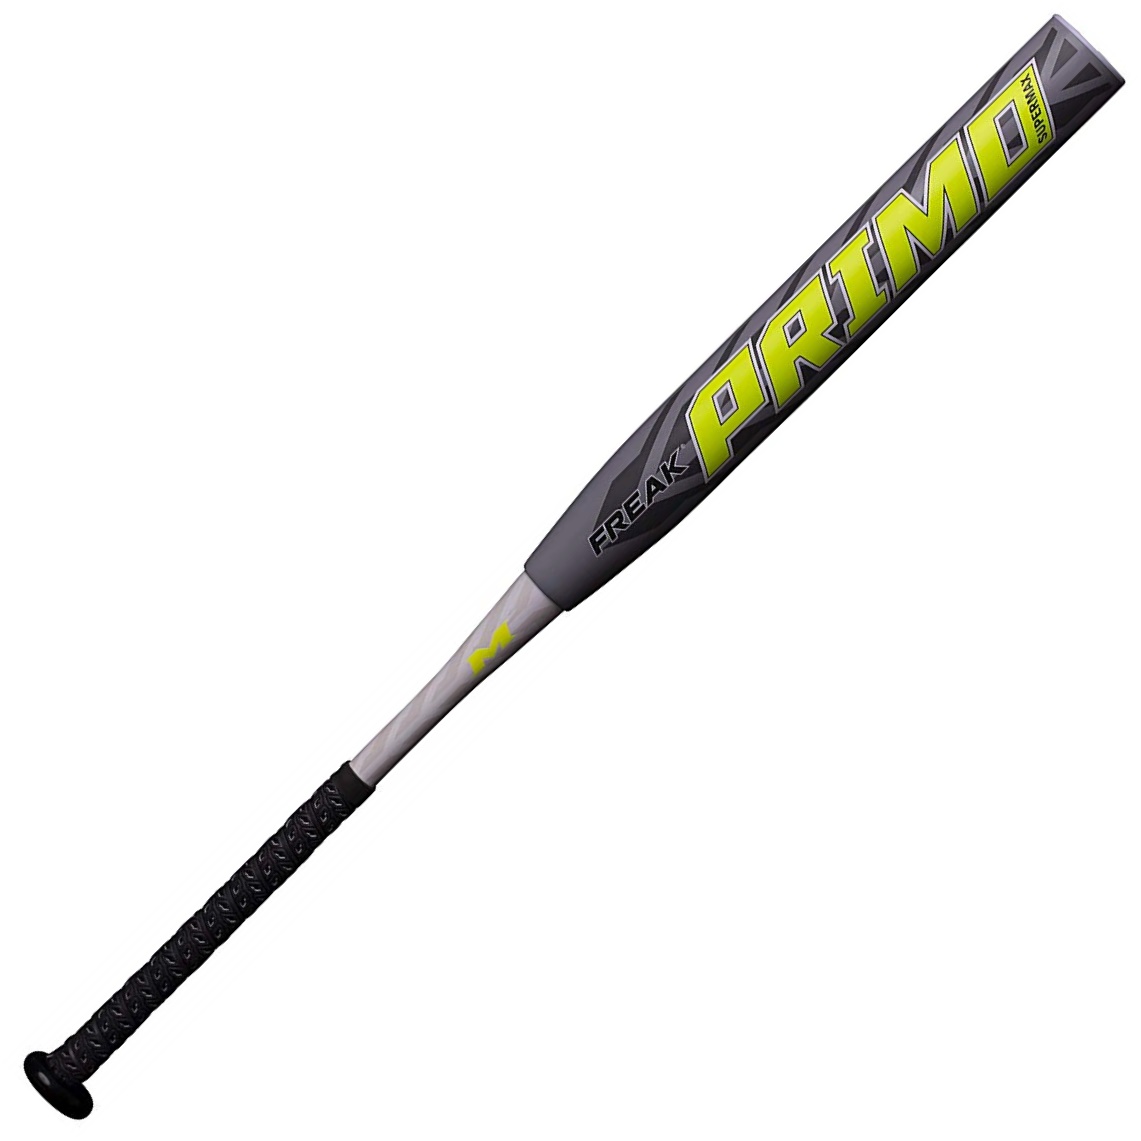 Miken's Triple Matrix Core + Tech increases our exclusive material volume by eliminating seam walls and improving the layering process resulting in a massive sweetspot and unmatched performance. Miken's F2P (FLEX 2 Power) optimizes handle flex and increases the overall speed of the bat head through the hitting zone. Miken bats are 100% composite Made in USA.